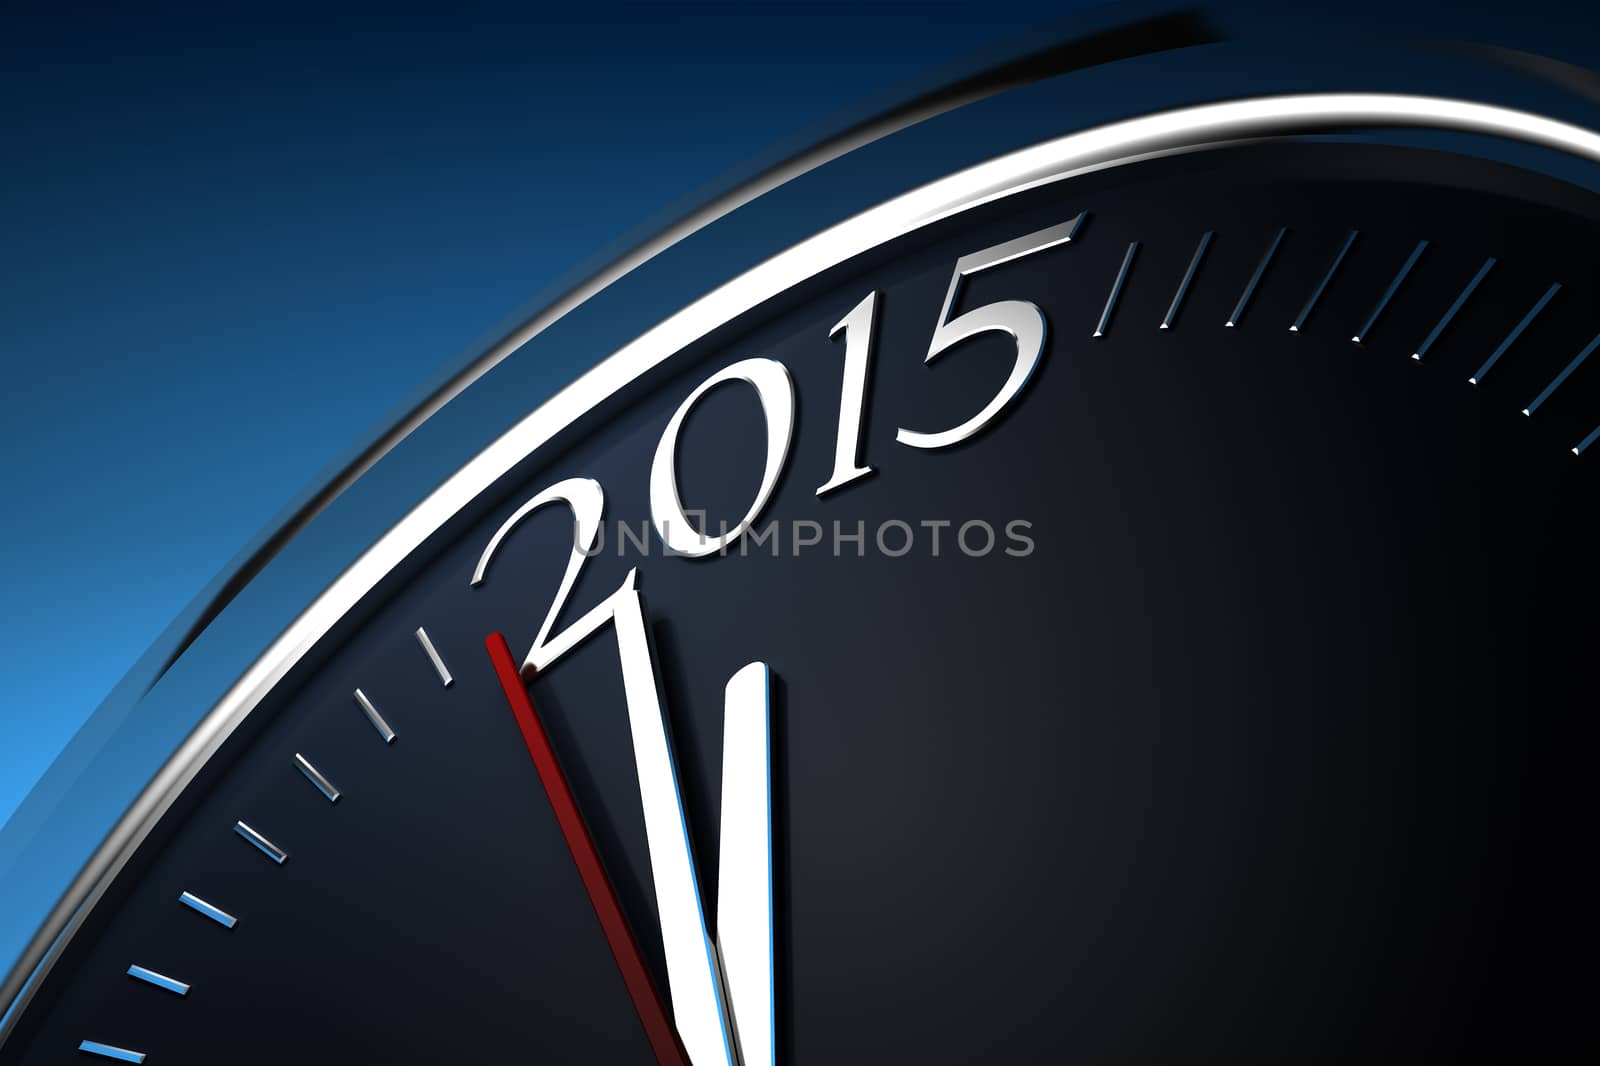 Last Minutes to 2015